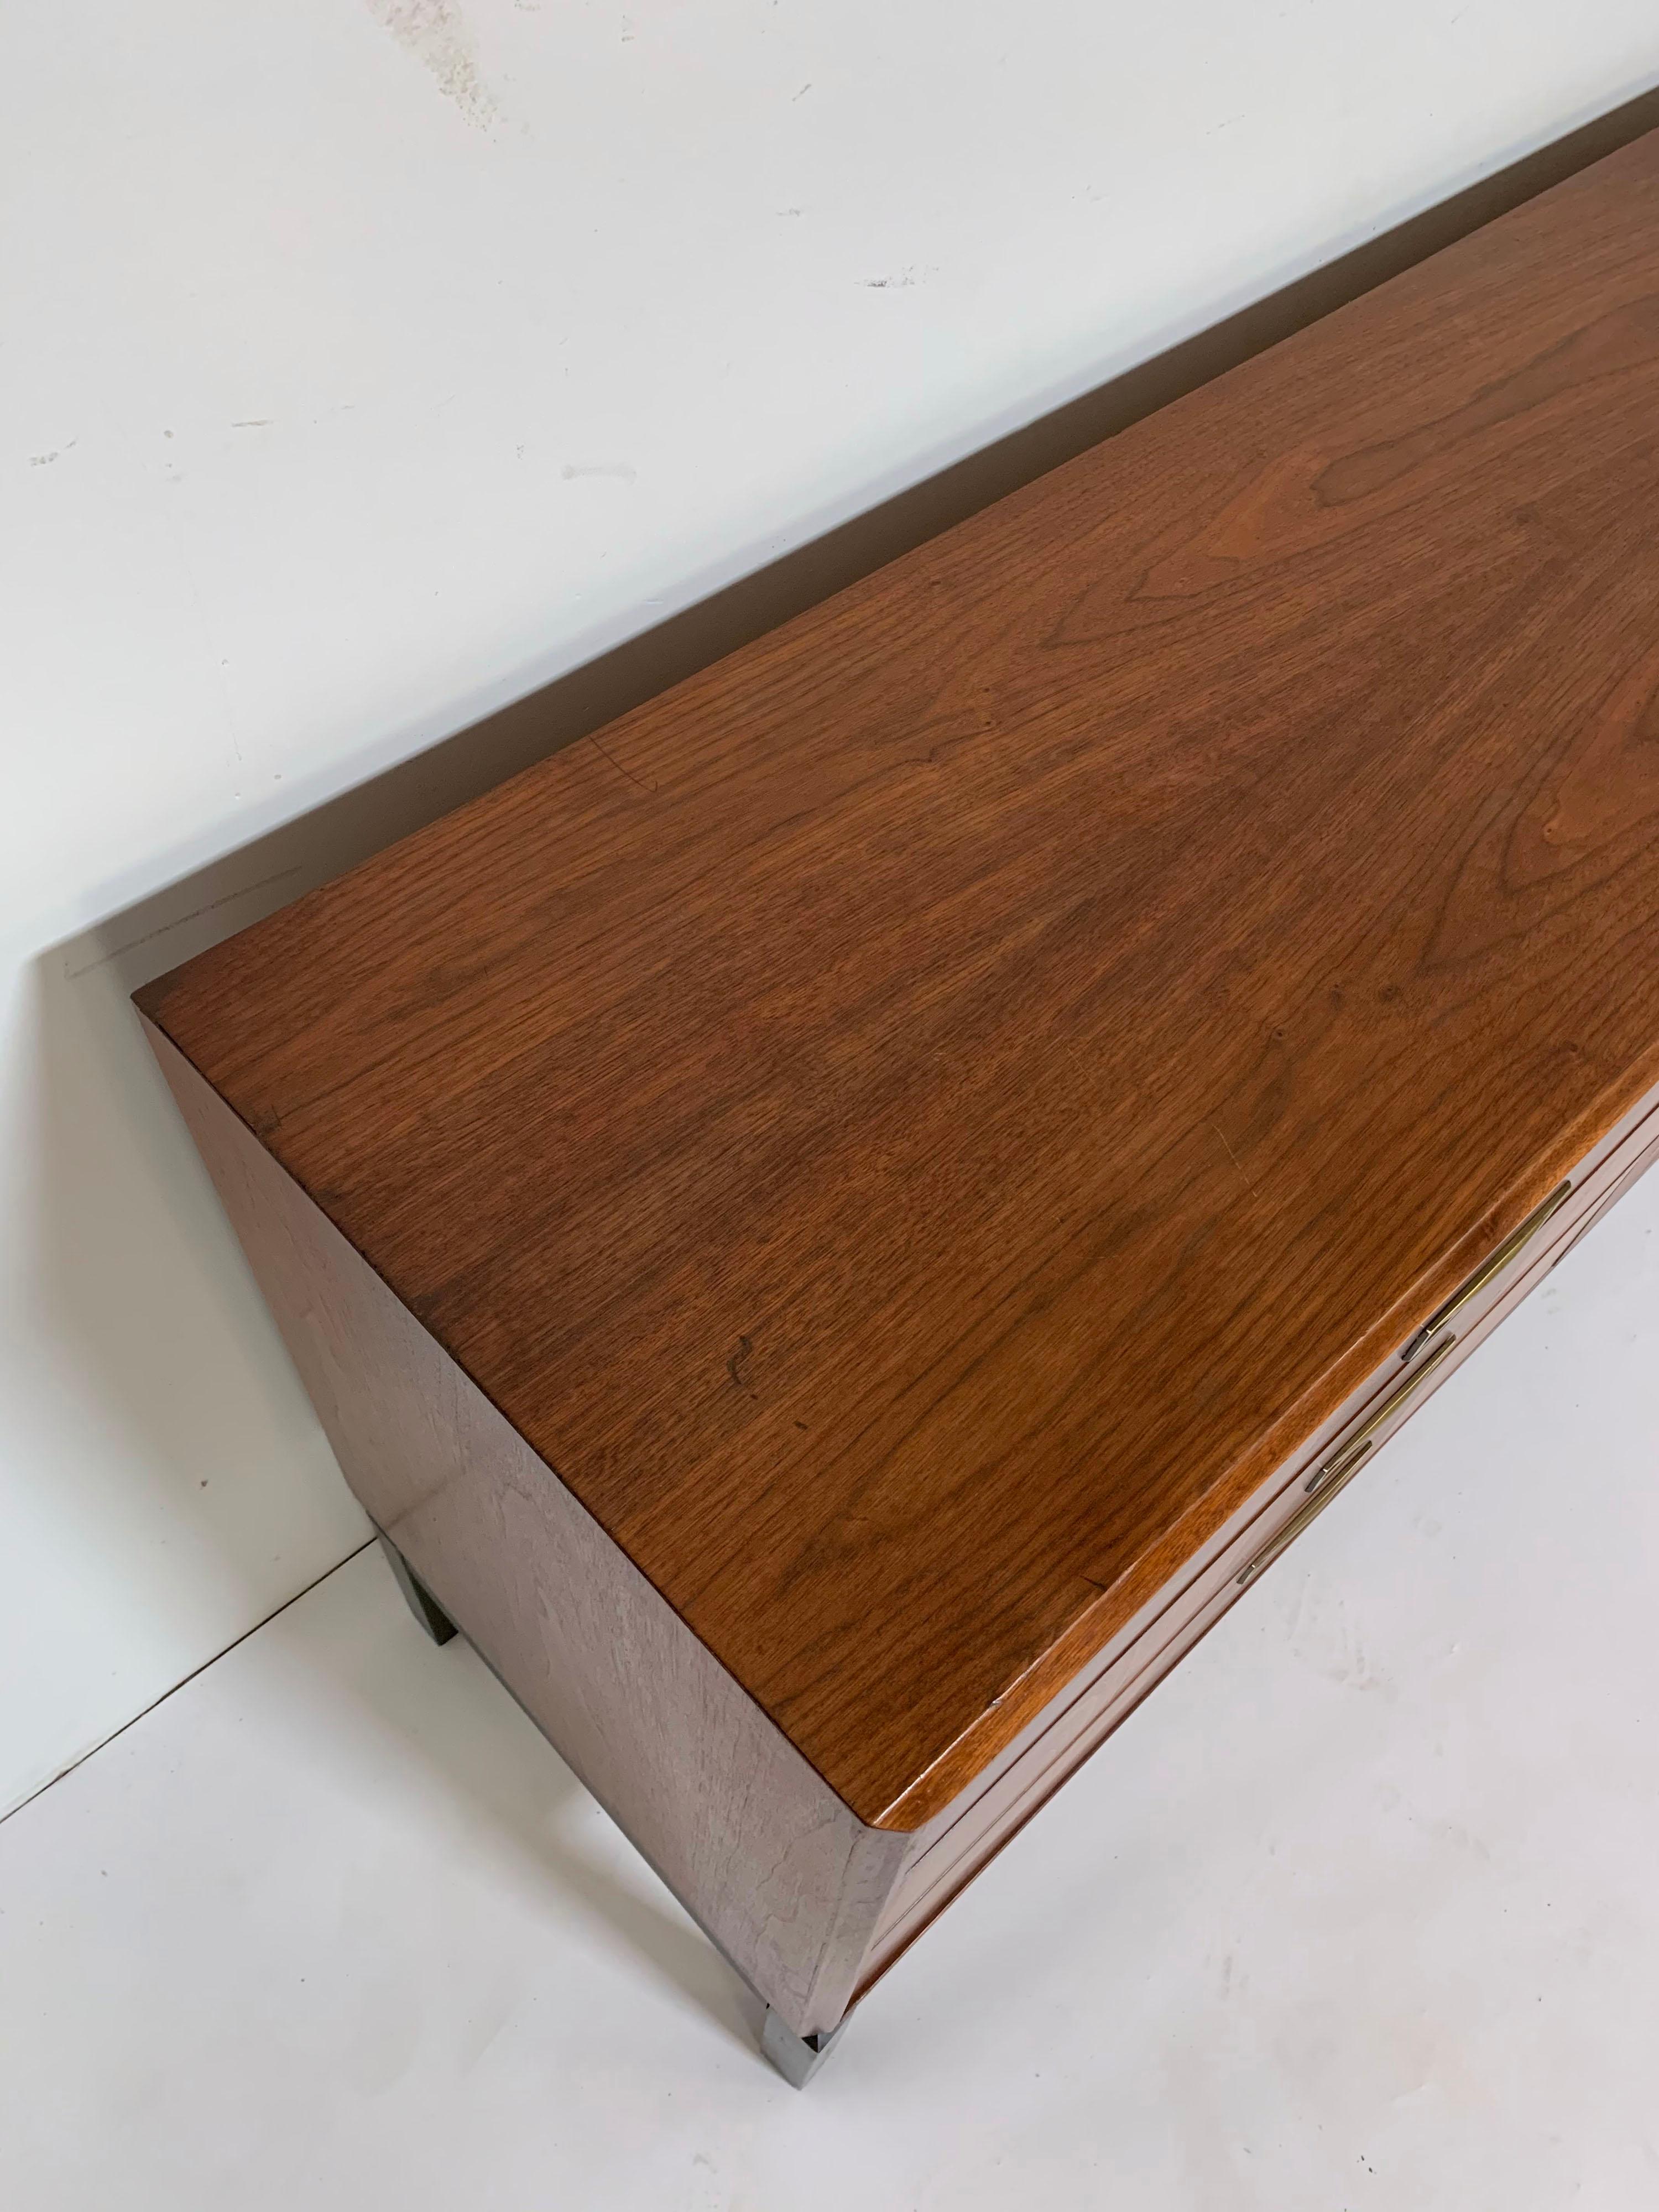 Midcentury Six-Drawer Walnut Dresser by Jack Cartwright for Founders circa 1970s 1